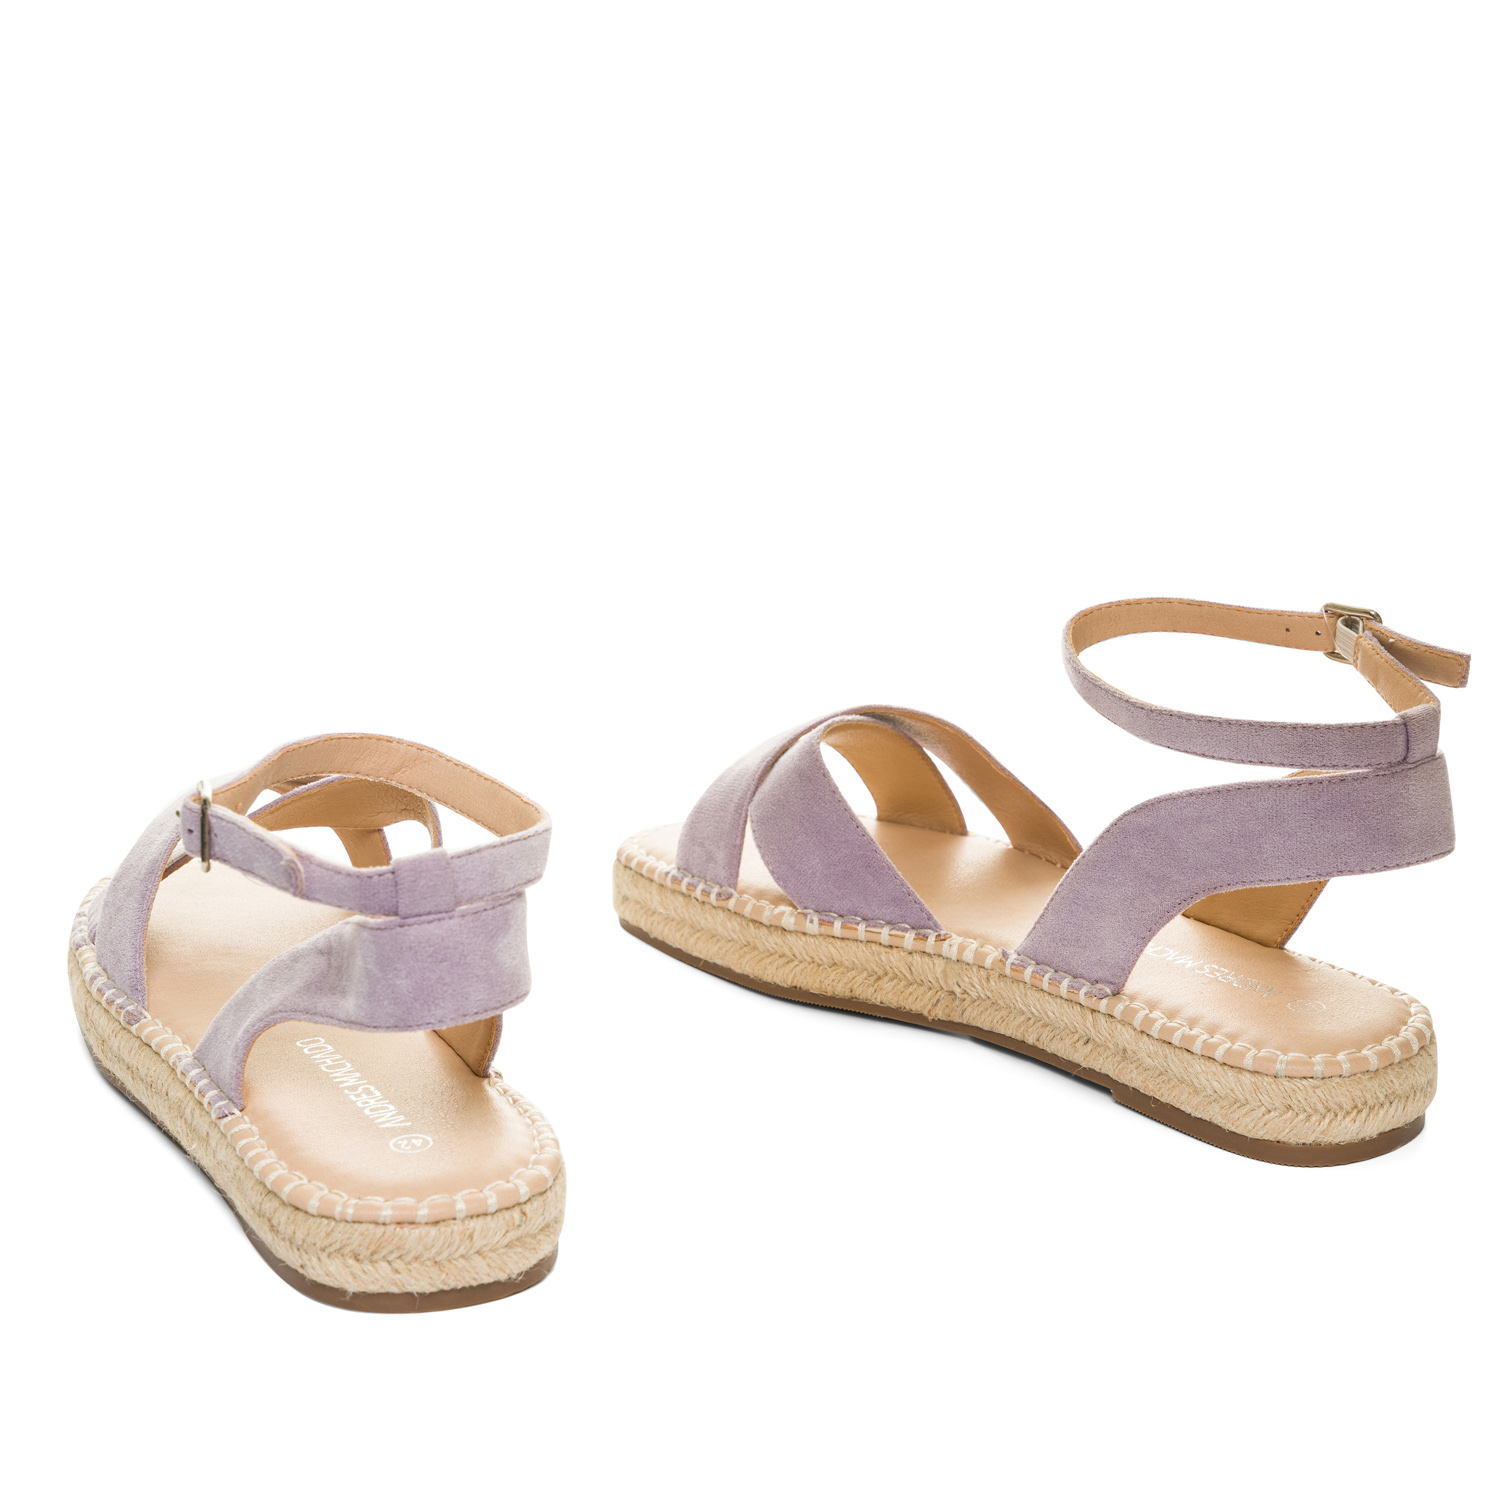 Purple faux suede sandals with jute wedge 